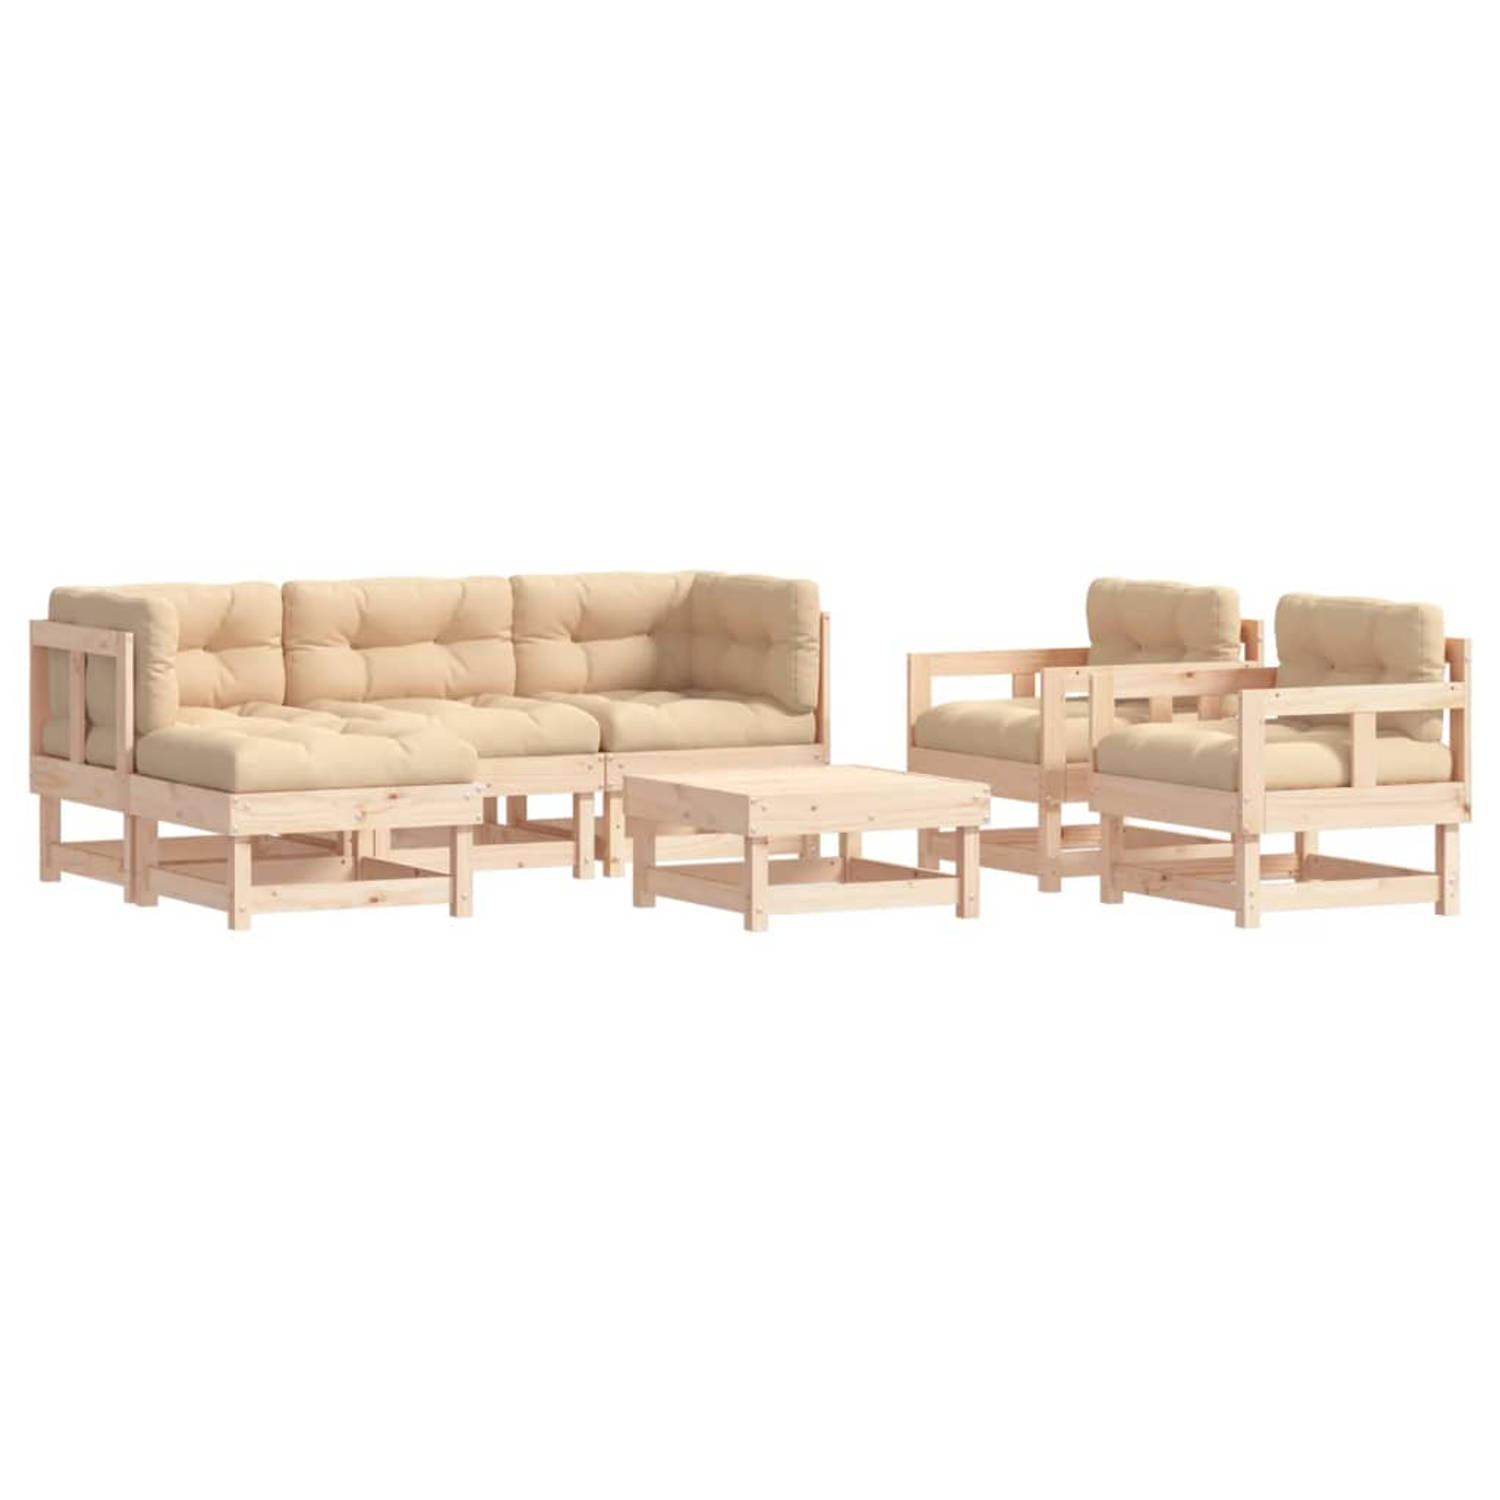 The Living Store Loungeset Grenenhout - Modulair - 61x60.5x62 cm - Beige kussens